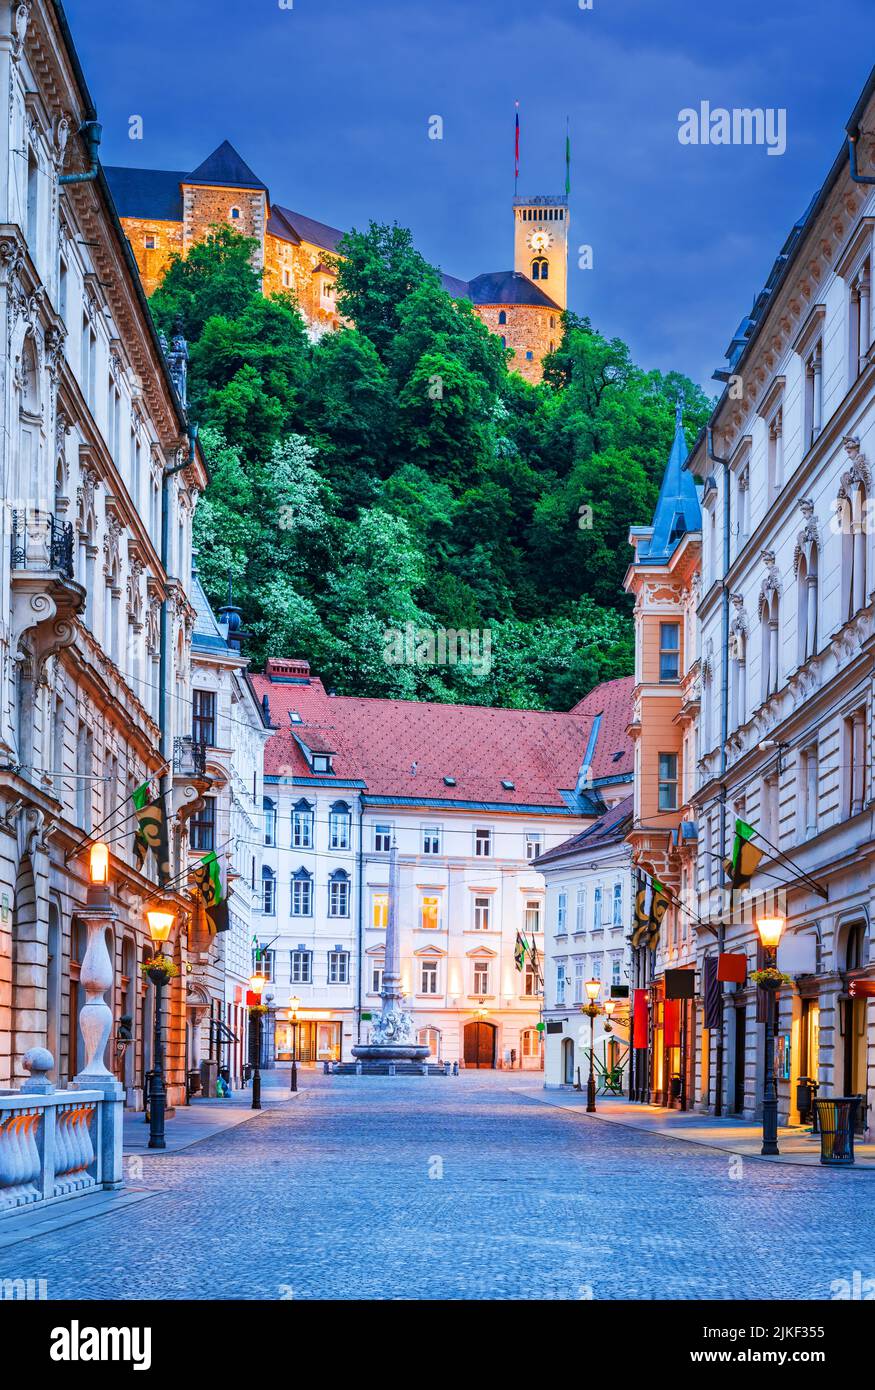 Ljubljana. Beautiful cities of Europe - charming, capital of Slovenia view of the downtown, castle. Stock Photo